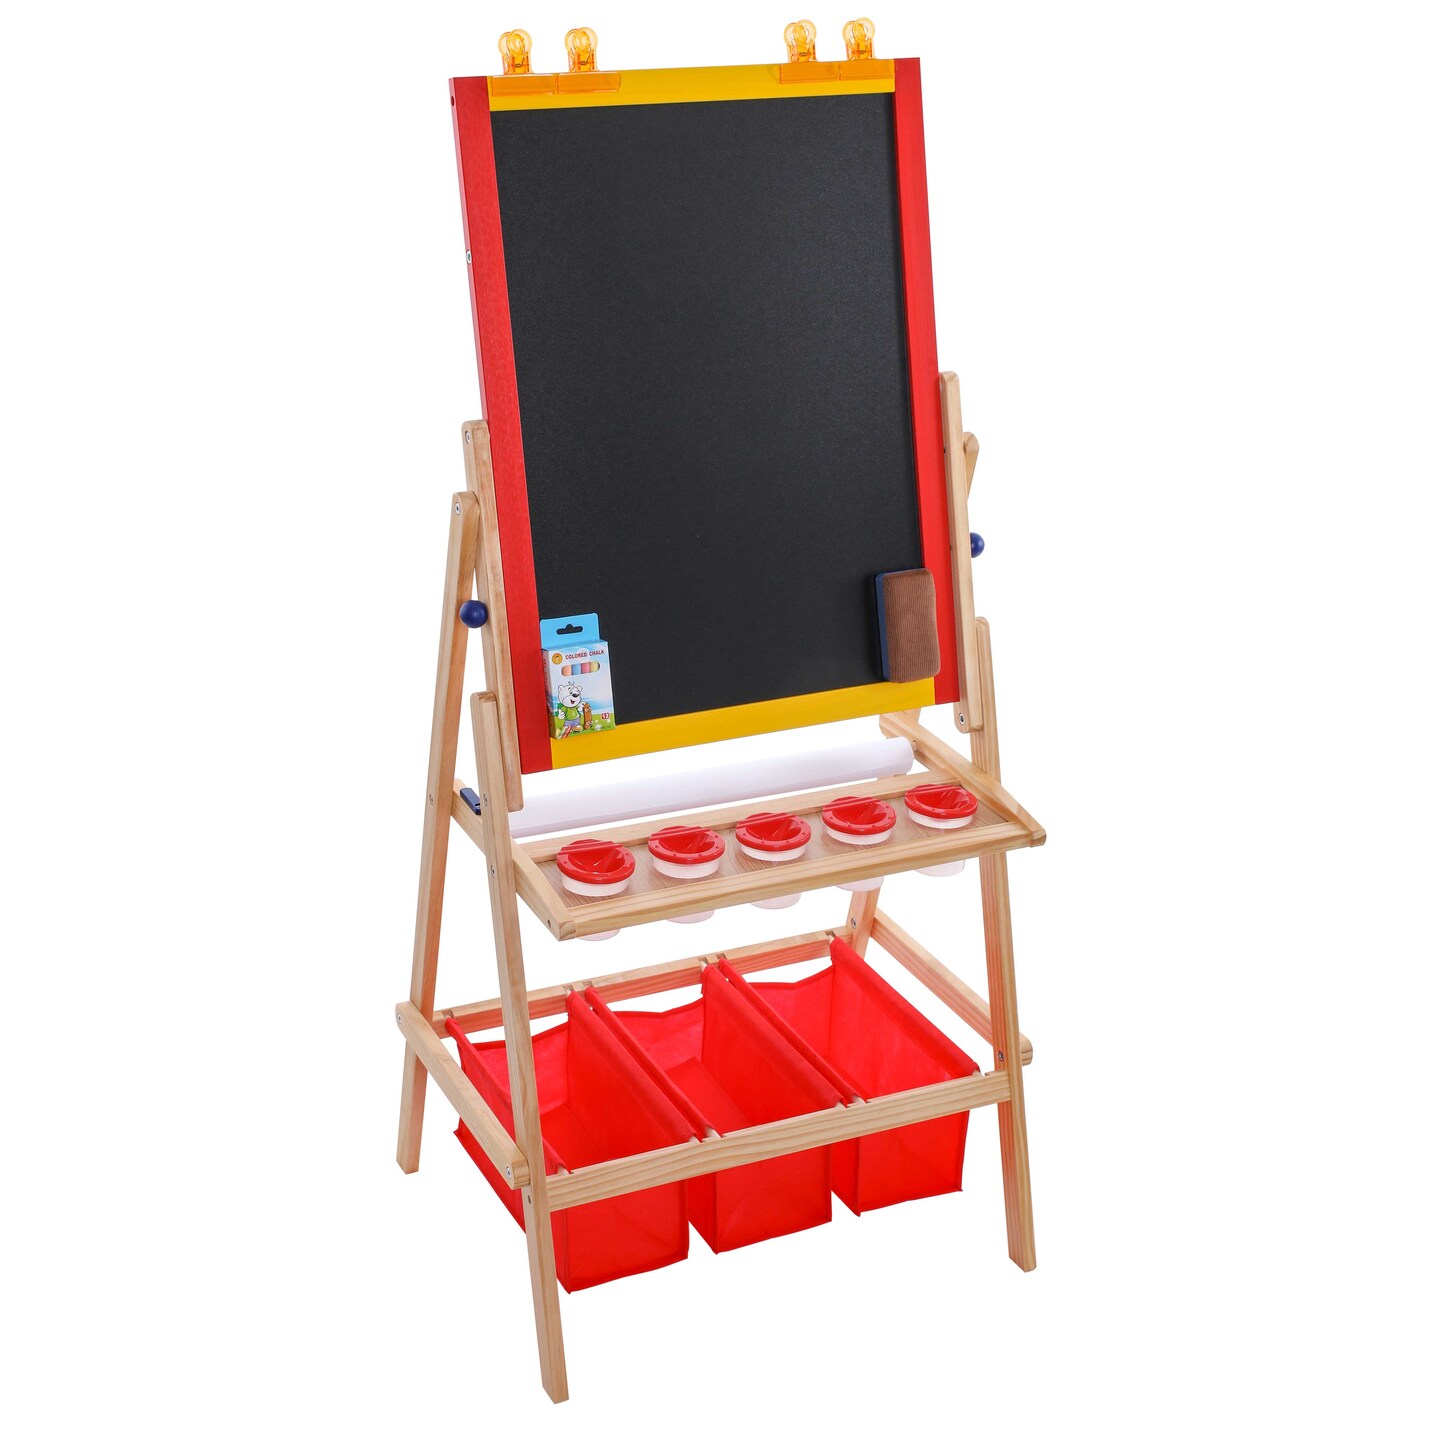 Flip-Over Children&#x27;s Double-Sided Paint &#x26; Drawing Art Easel Board with Chalkboard, Dry Erase Board, Paper Roll, 3 Storage Bins, 5 No-Spill Cups, Chalk